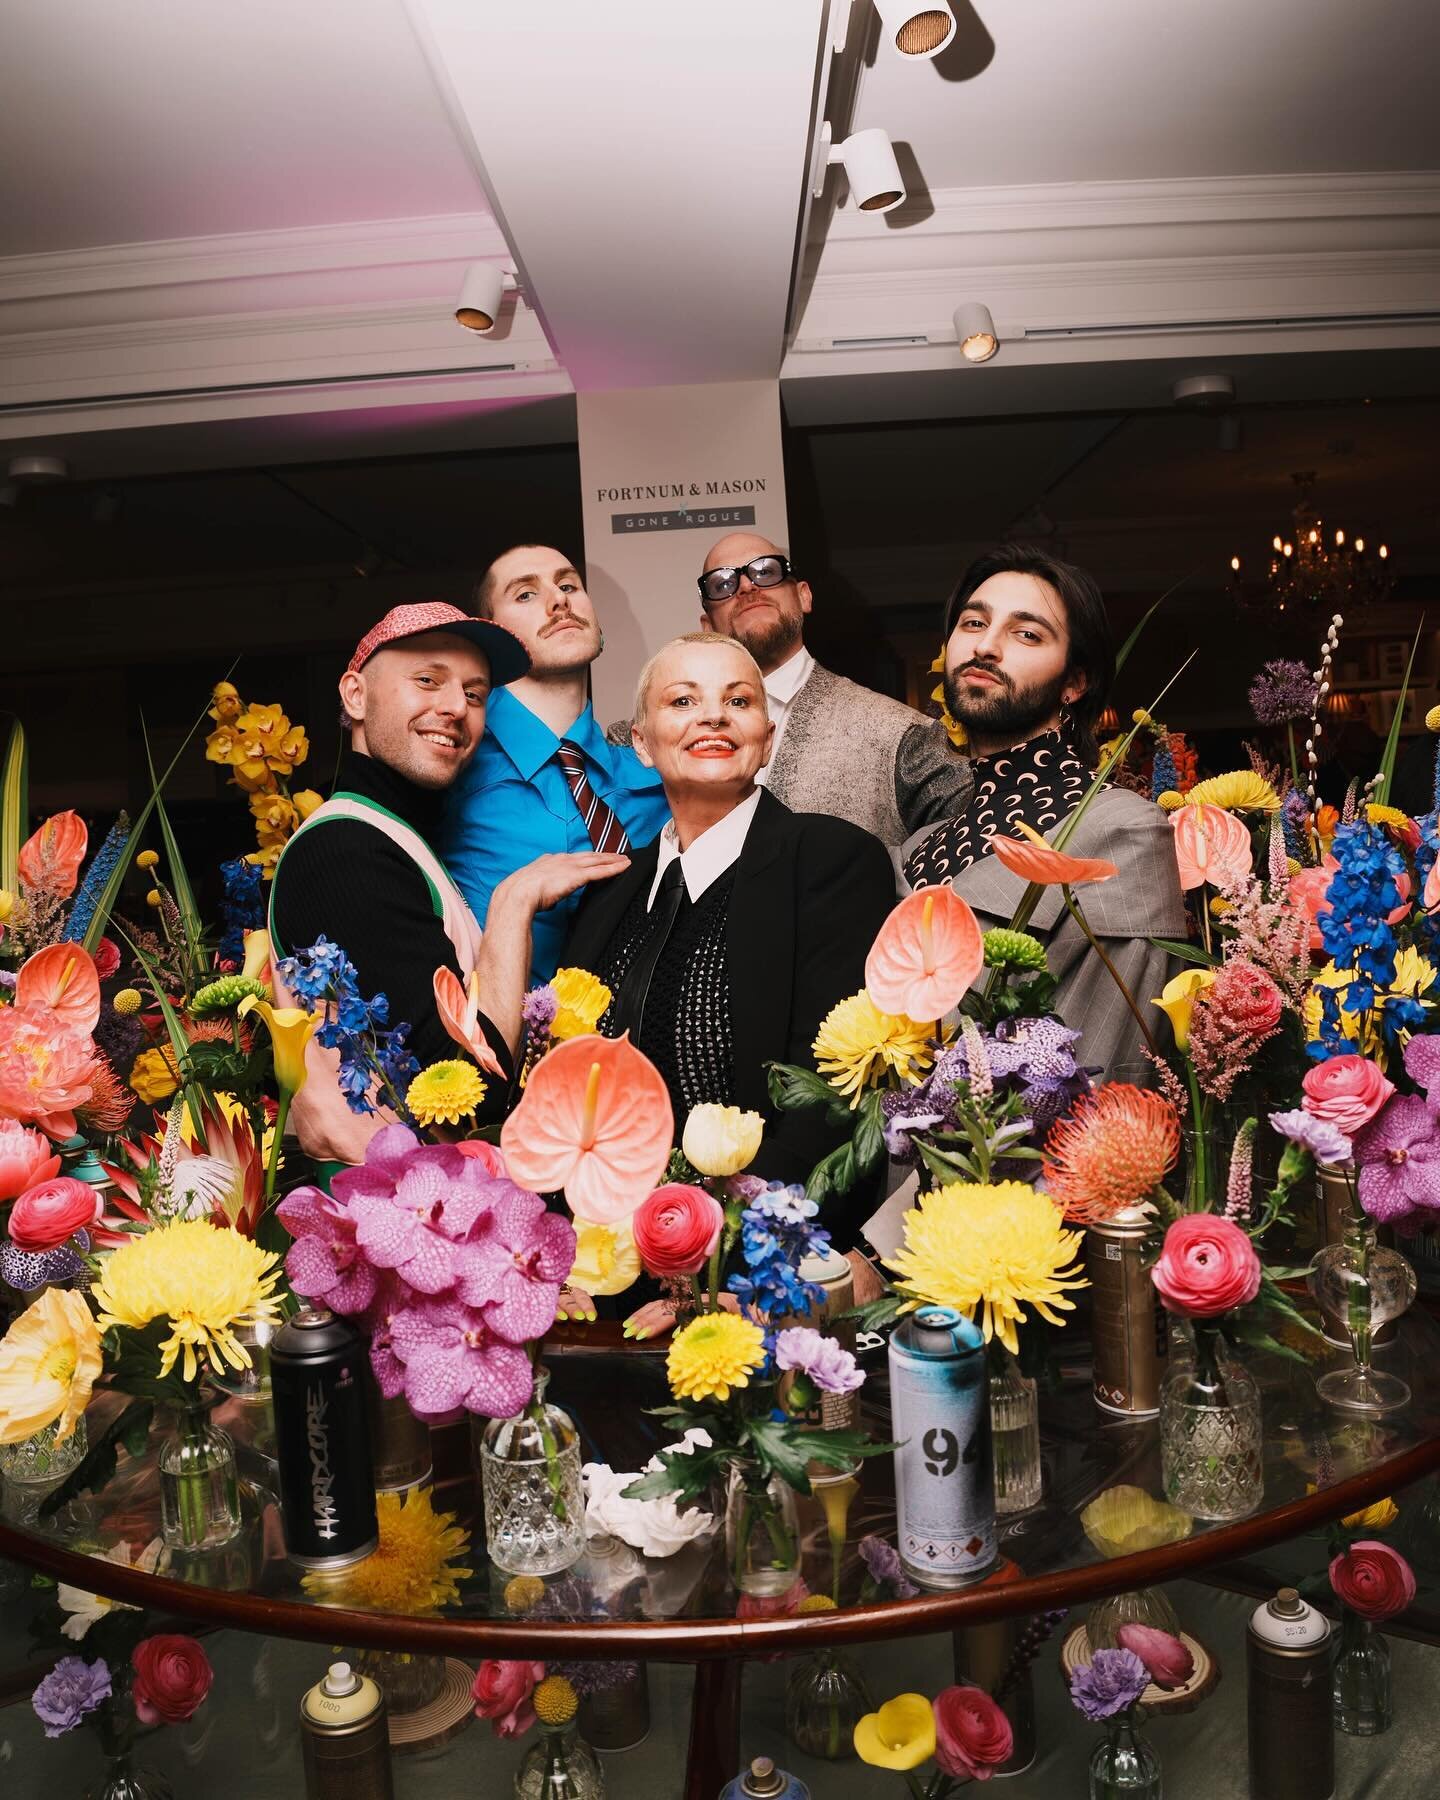 FORTNUMS FUN! From our collaboration event last week with @fortnums to launch our LIVE auction online with @theauctioncollective and @centrepointuk 

Auction link is in our bio! Go and bid.

Event shot by @itsvphoto
Flowers by @elizabethcocozza 
Spec